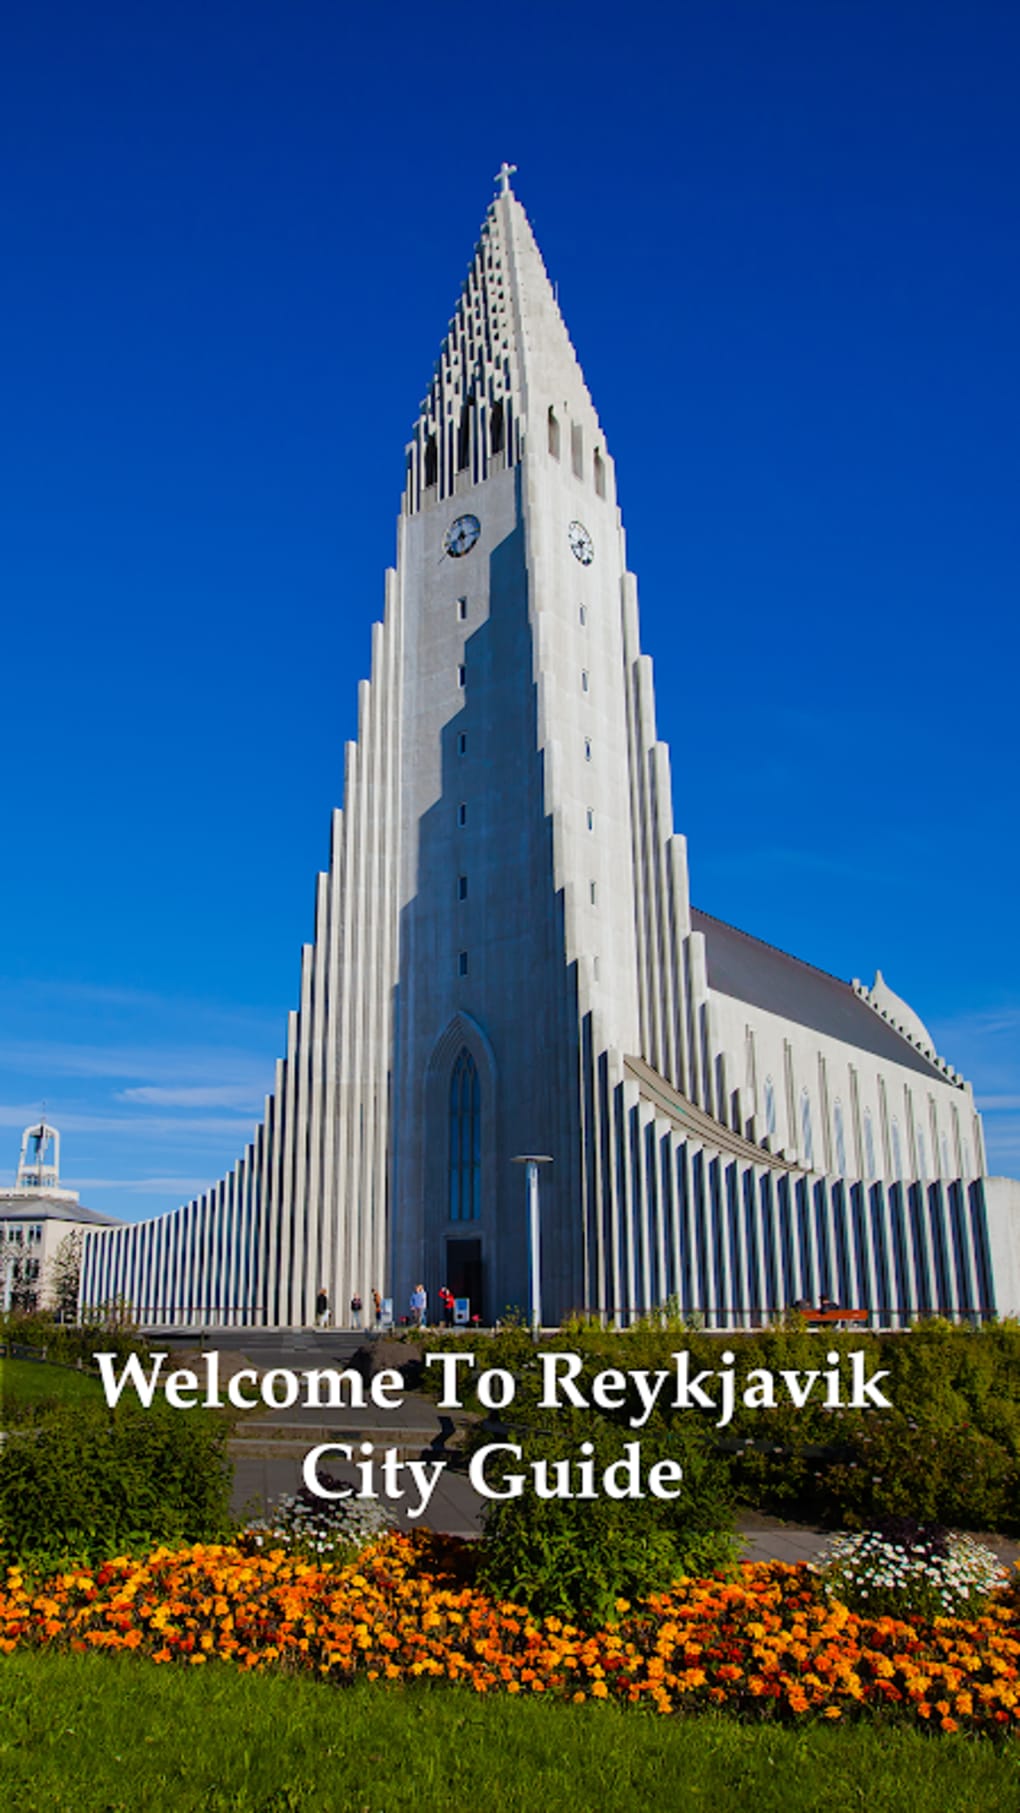 Reykjavik City Guide & Around Iceland APK for Android - Download